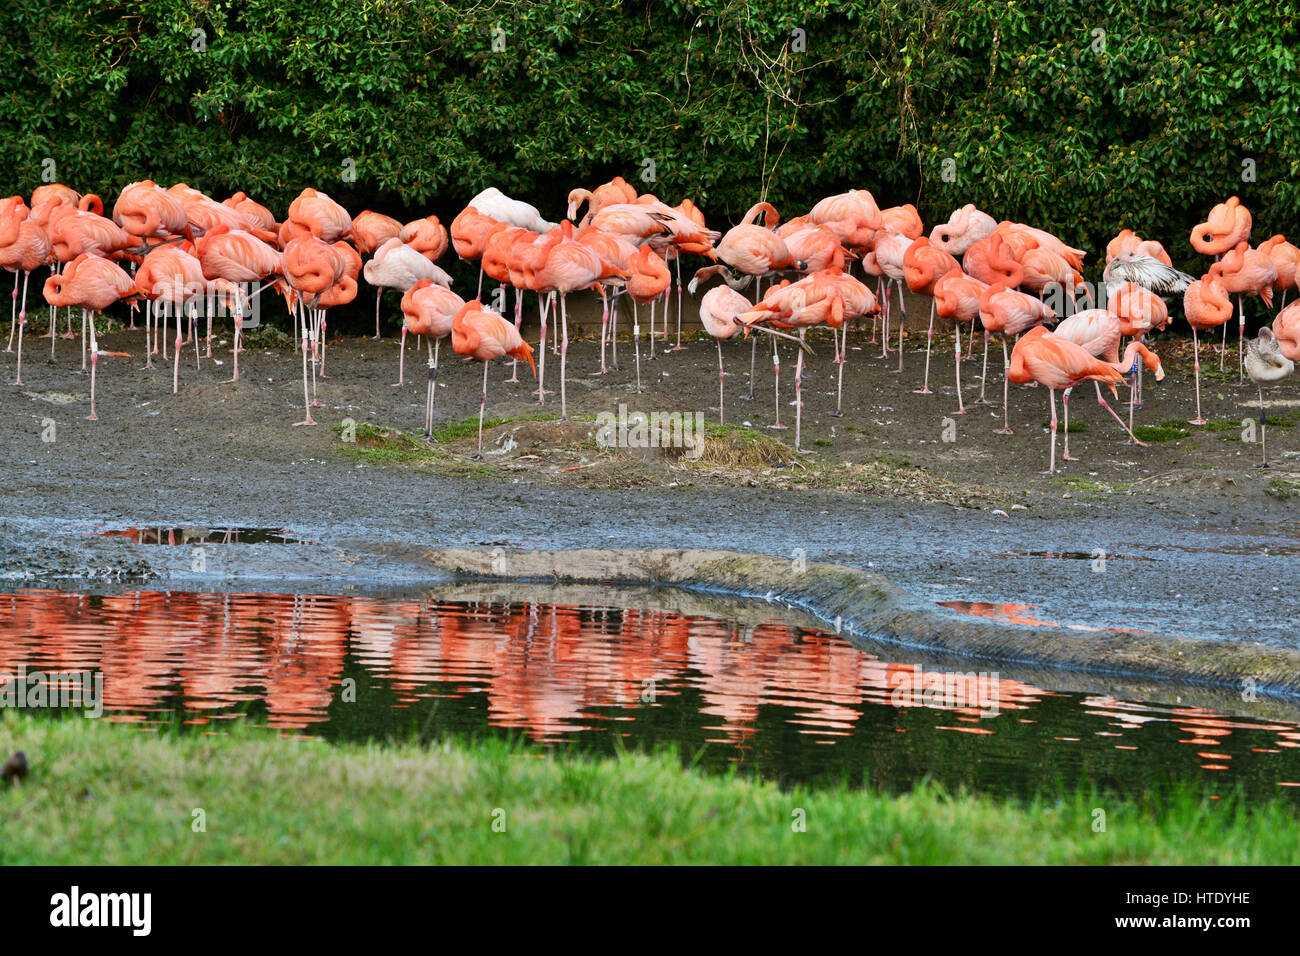 A Group Of Sleeping Flamingos With Their Reflections In Water; Slimbridge, Gloucestershire, UK Stock Photo